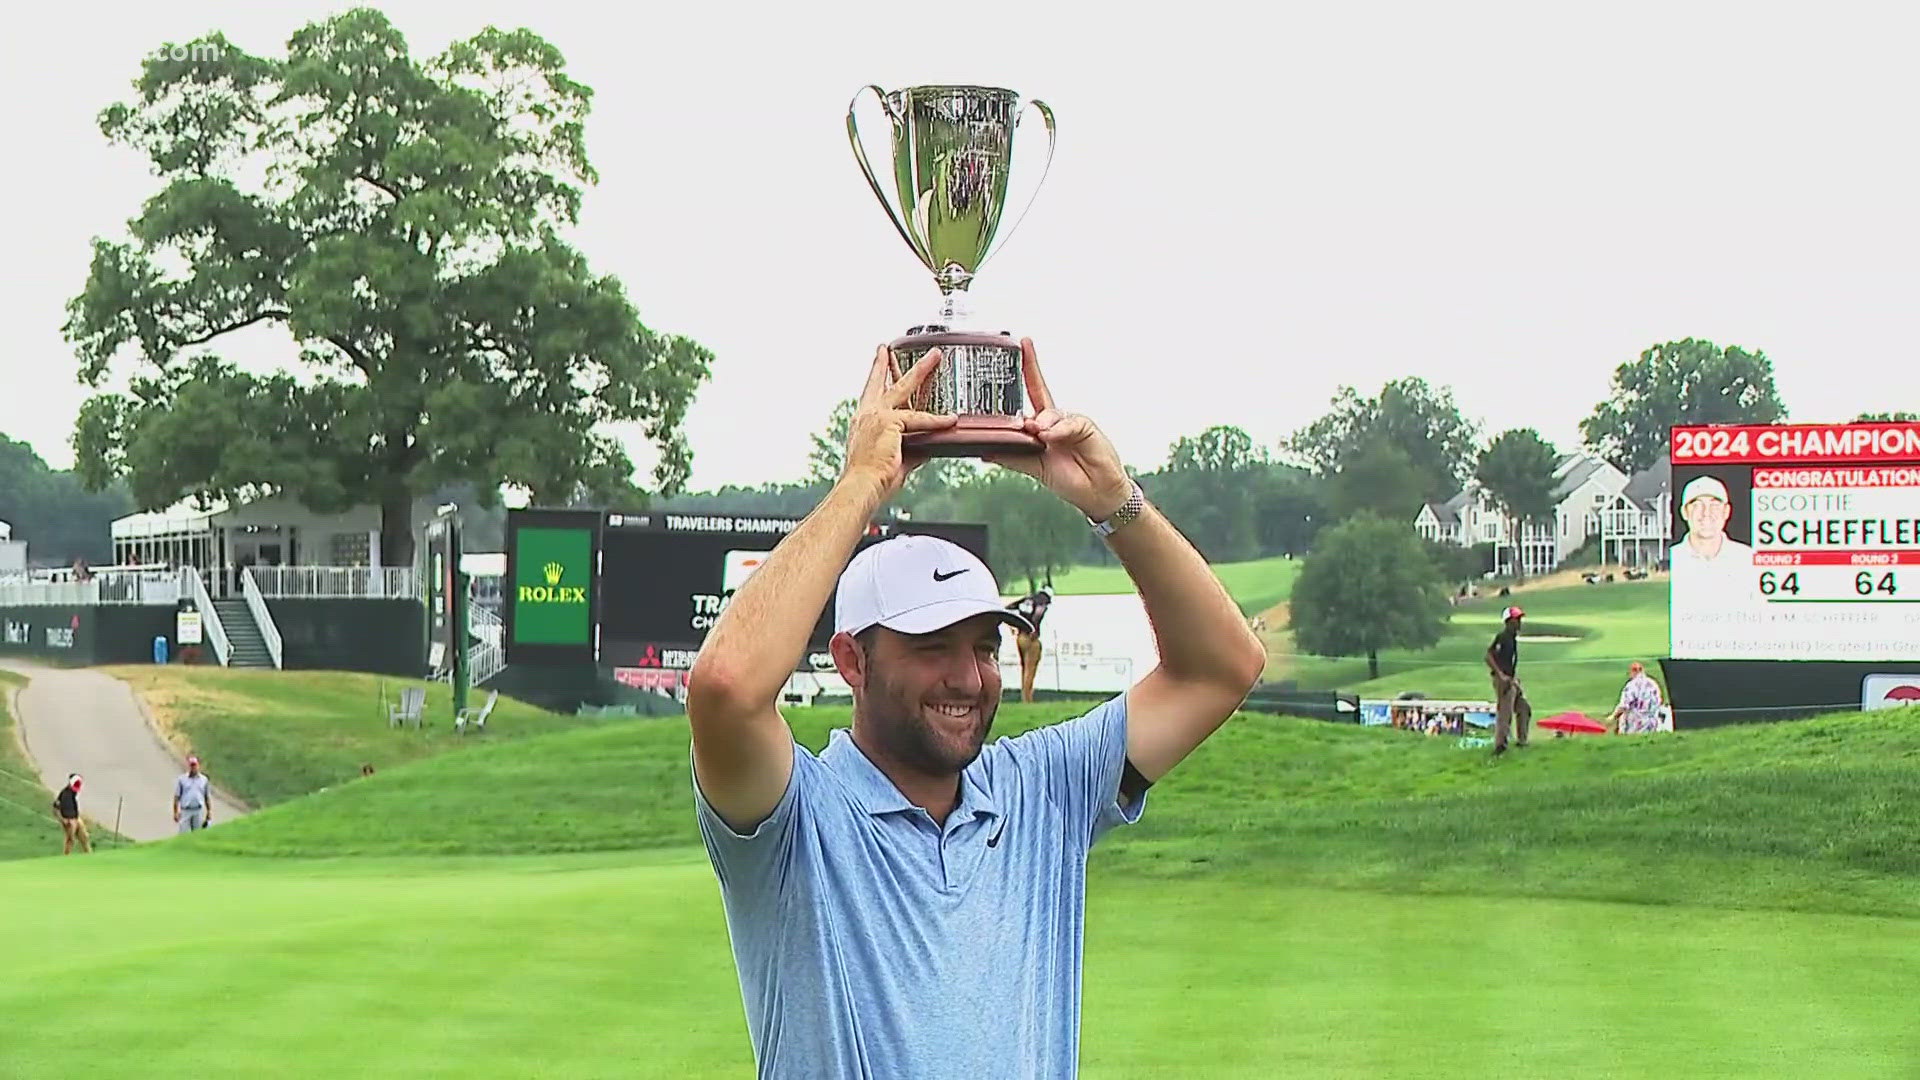 Scottie Scheffler tallies his sixth PGA Tour win of 2024, beating out Tom Kim in a playoff in the 18th hole.